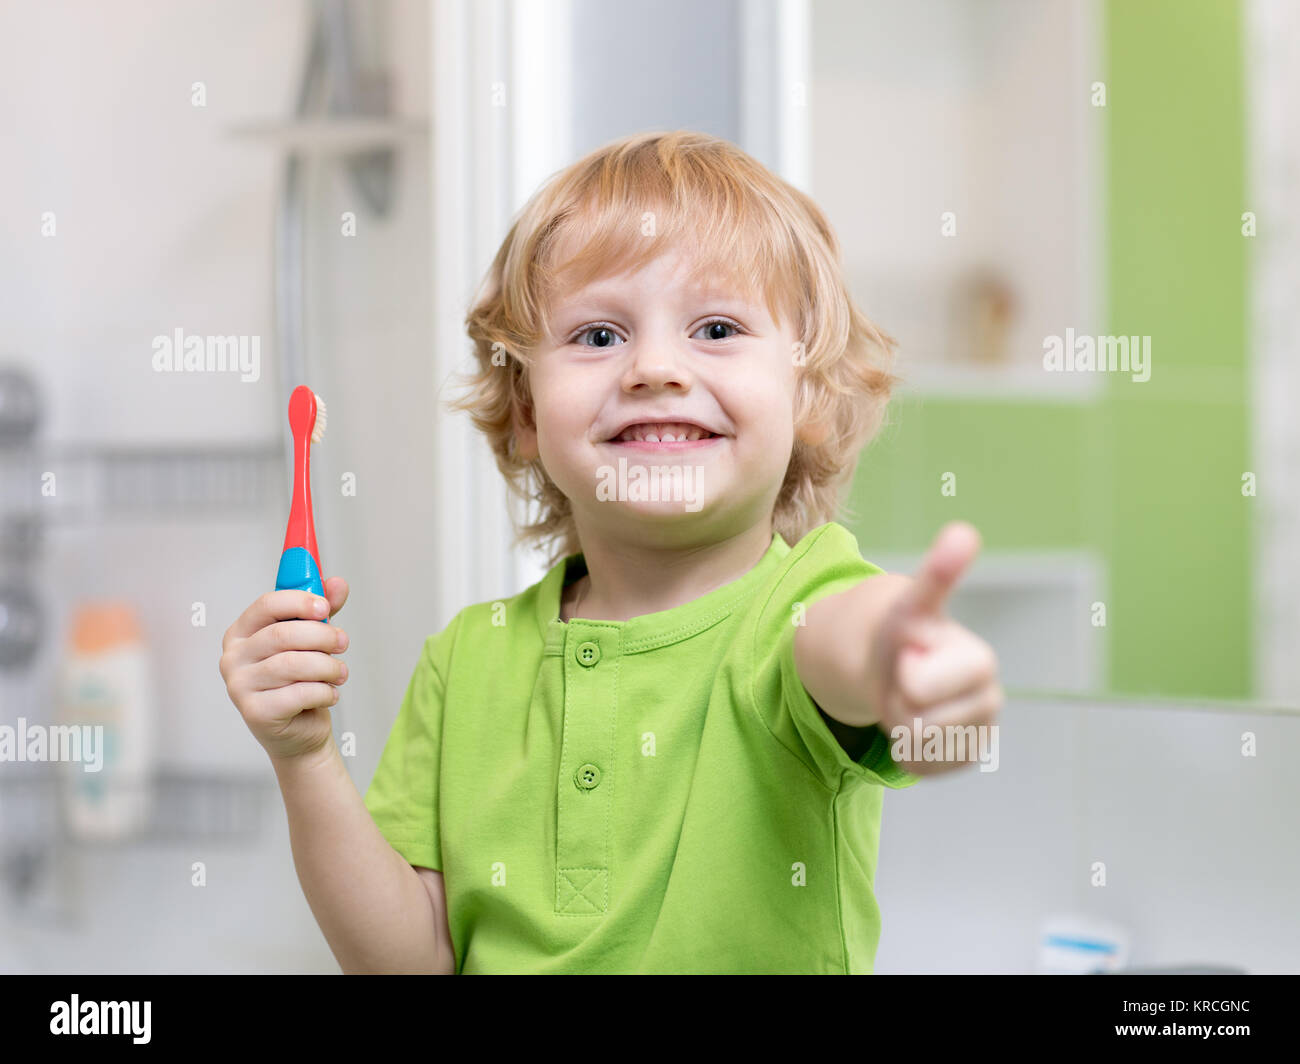 Little kid boy brushing his teeth in the bathroom. Smiling child holding toothbrush and showing thumbs up. Stock Photo